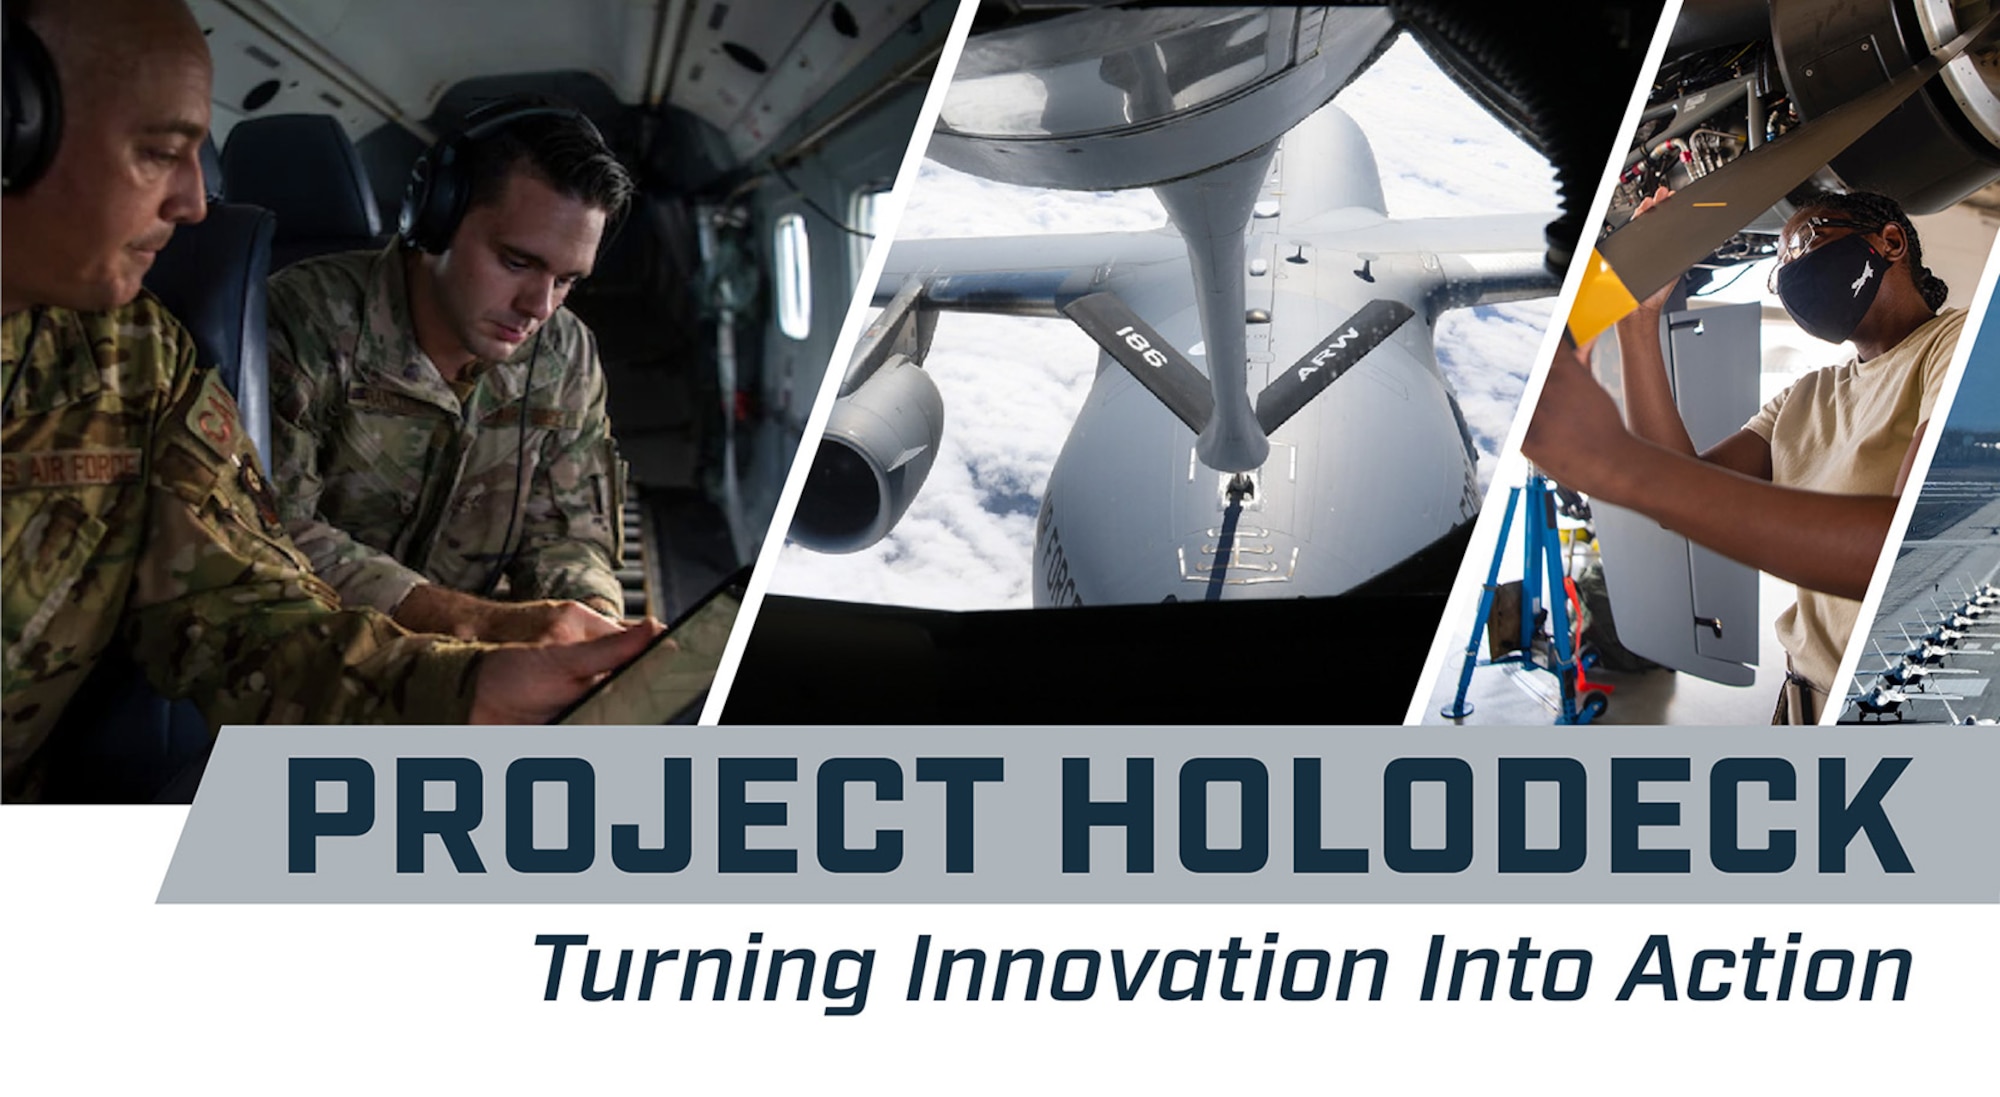 The Office of the Vice Chief of Staff of the Air Force recently partnered with BeProductable, LLC to develop an innovation management platform that allows the Air Force to align the right people, processes and funding to drive innovation at scale.